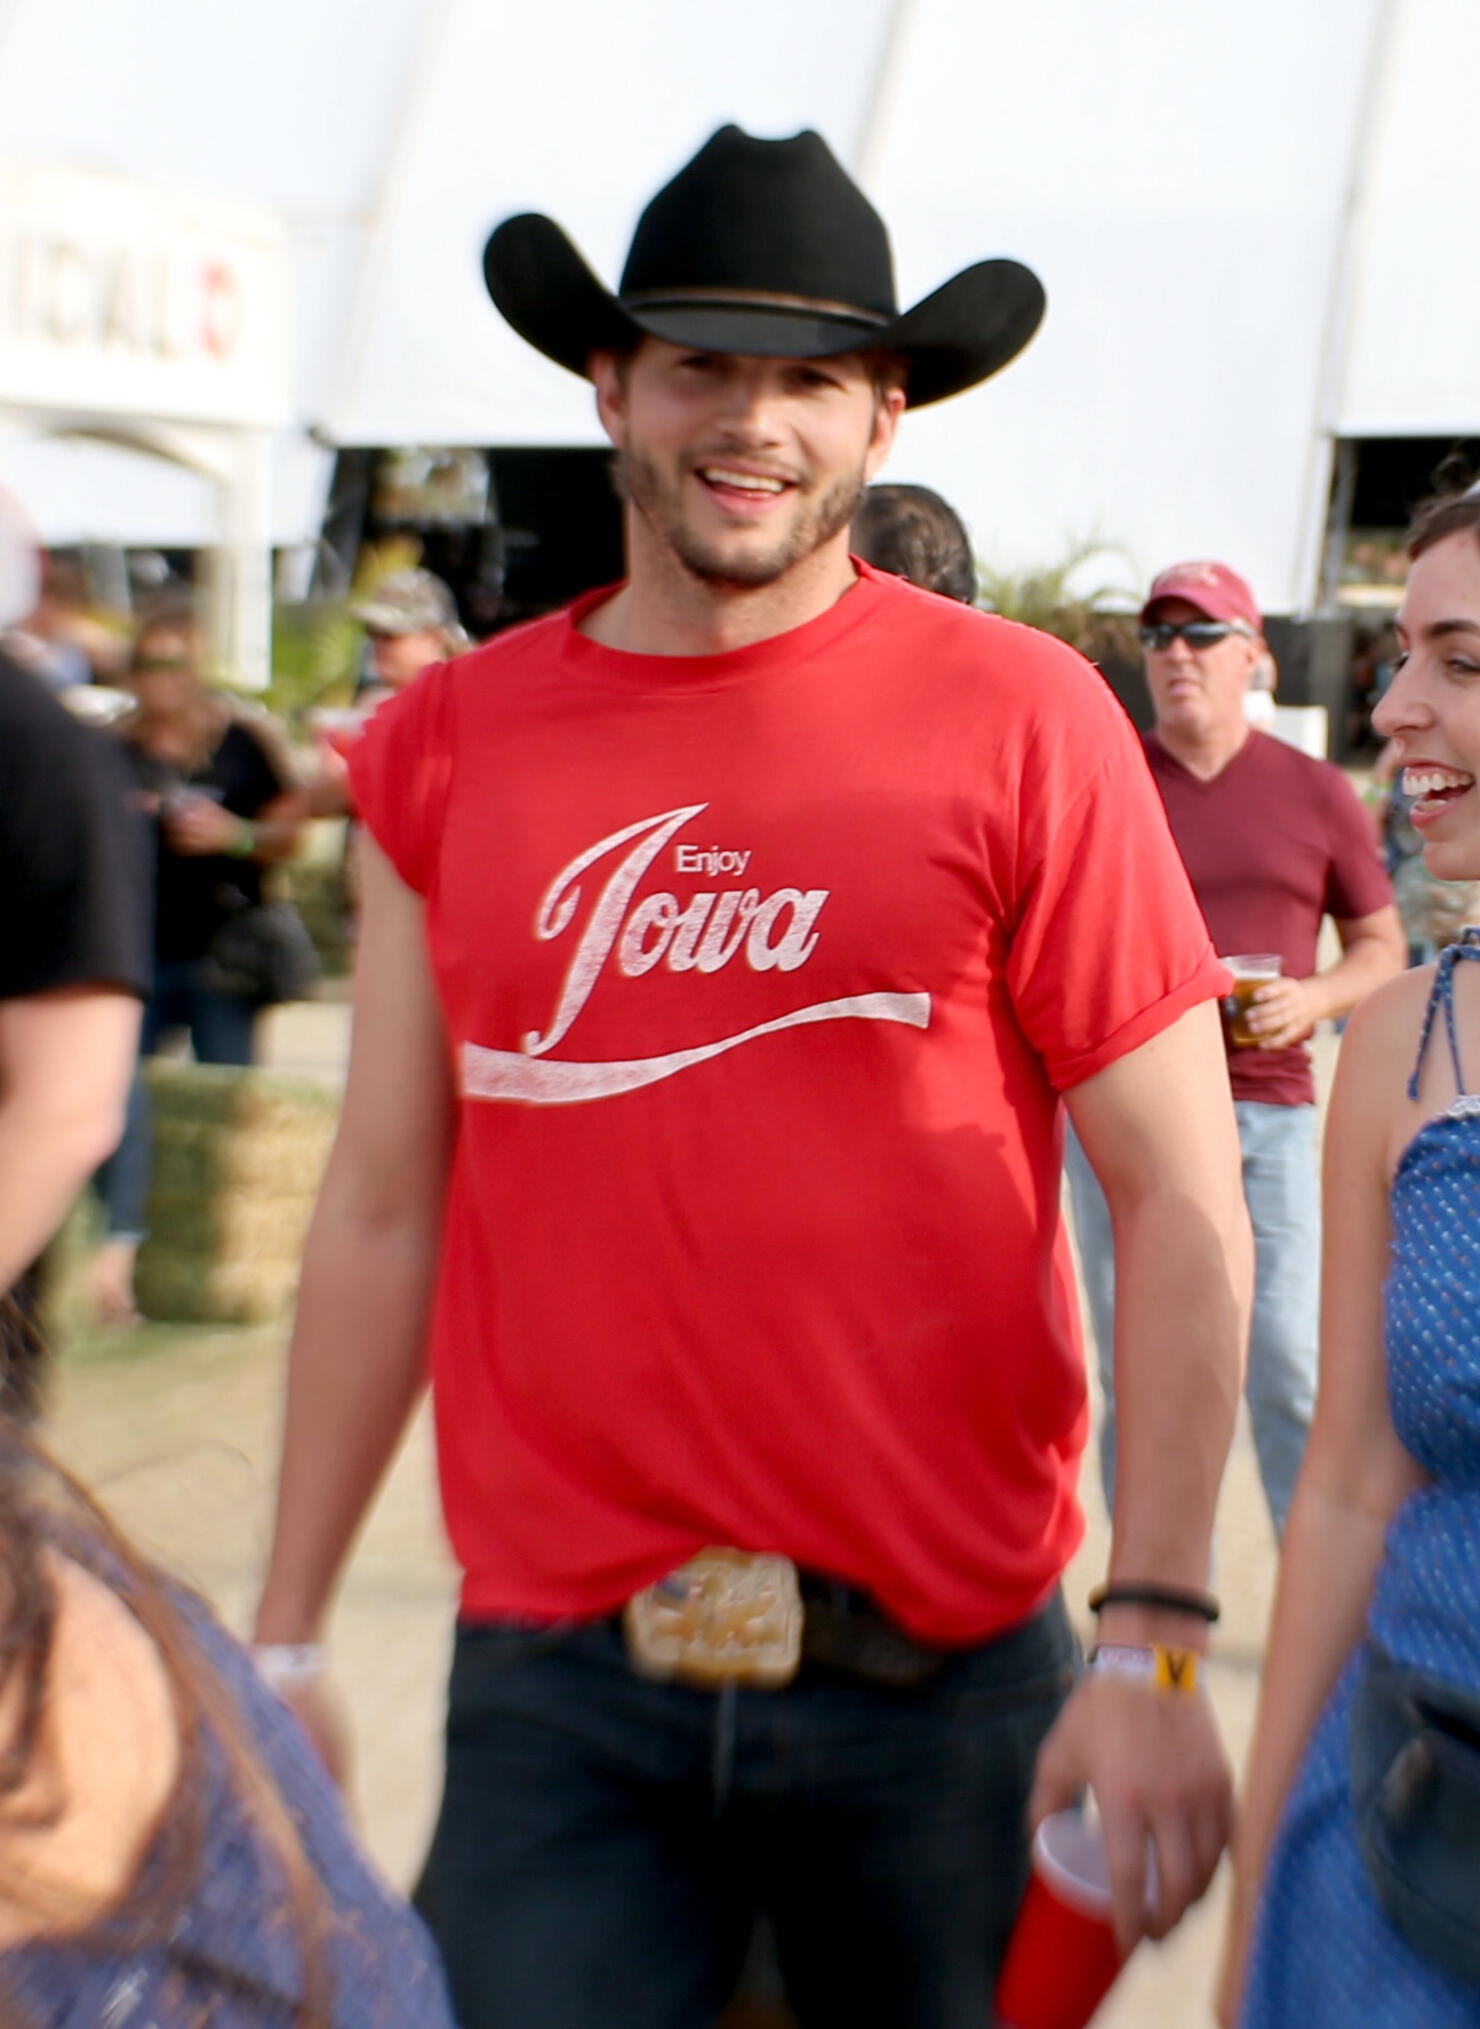 An Alternative View Of The 2014 Stagecoach California's Country Music Festival